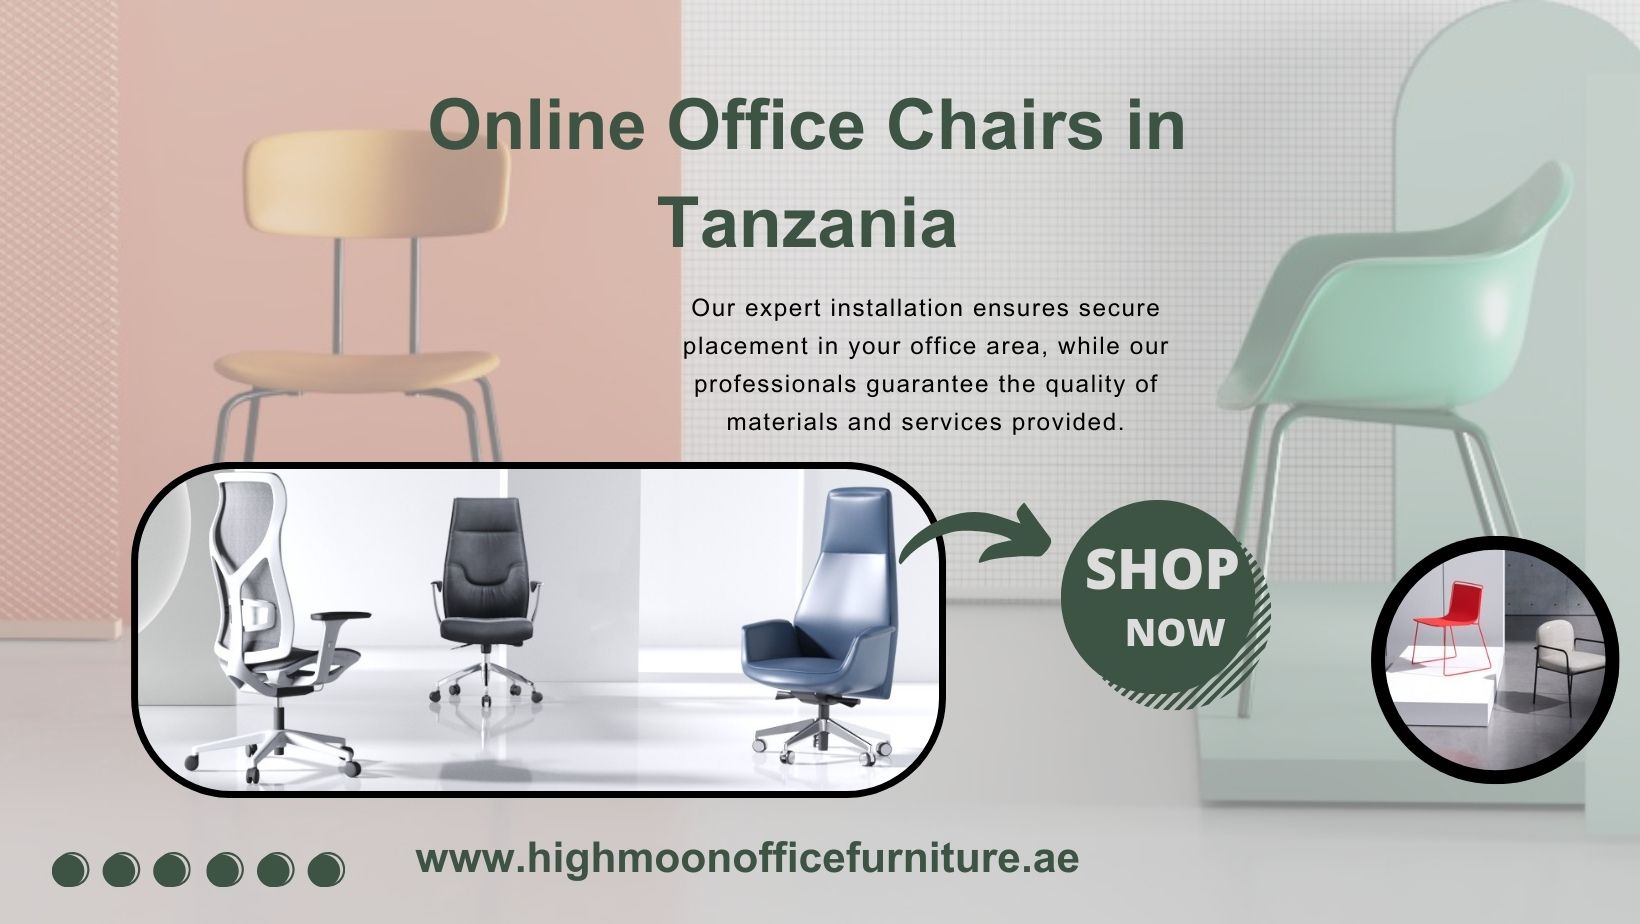 Online Office Chairs in Tanzania